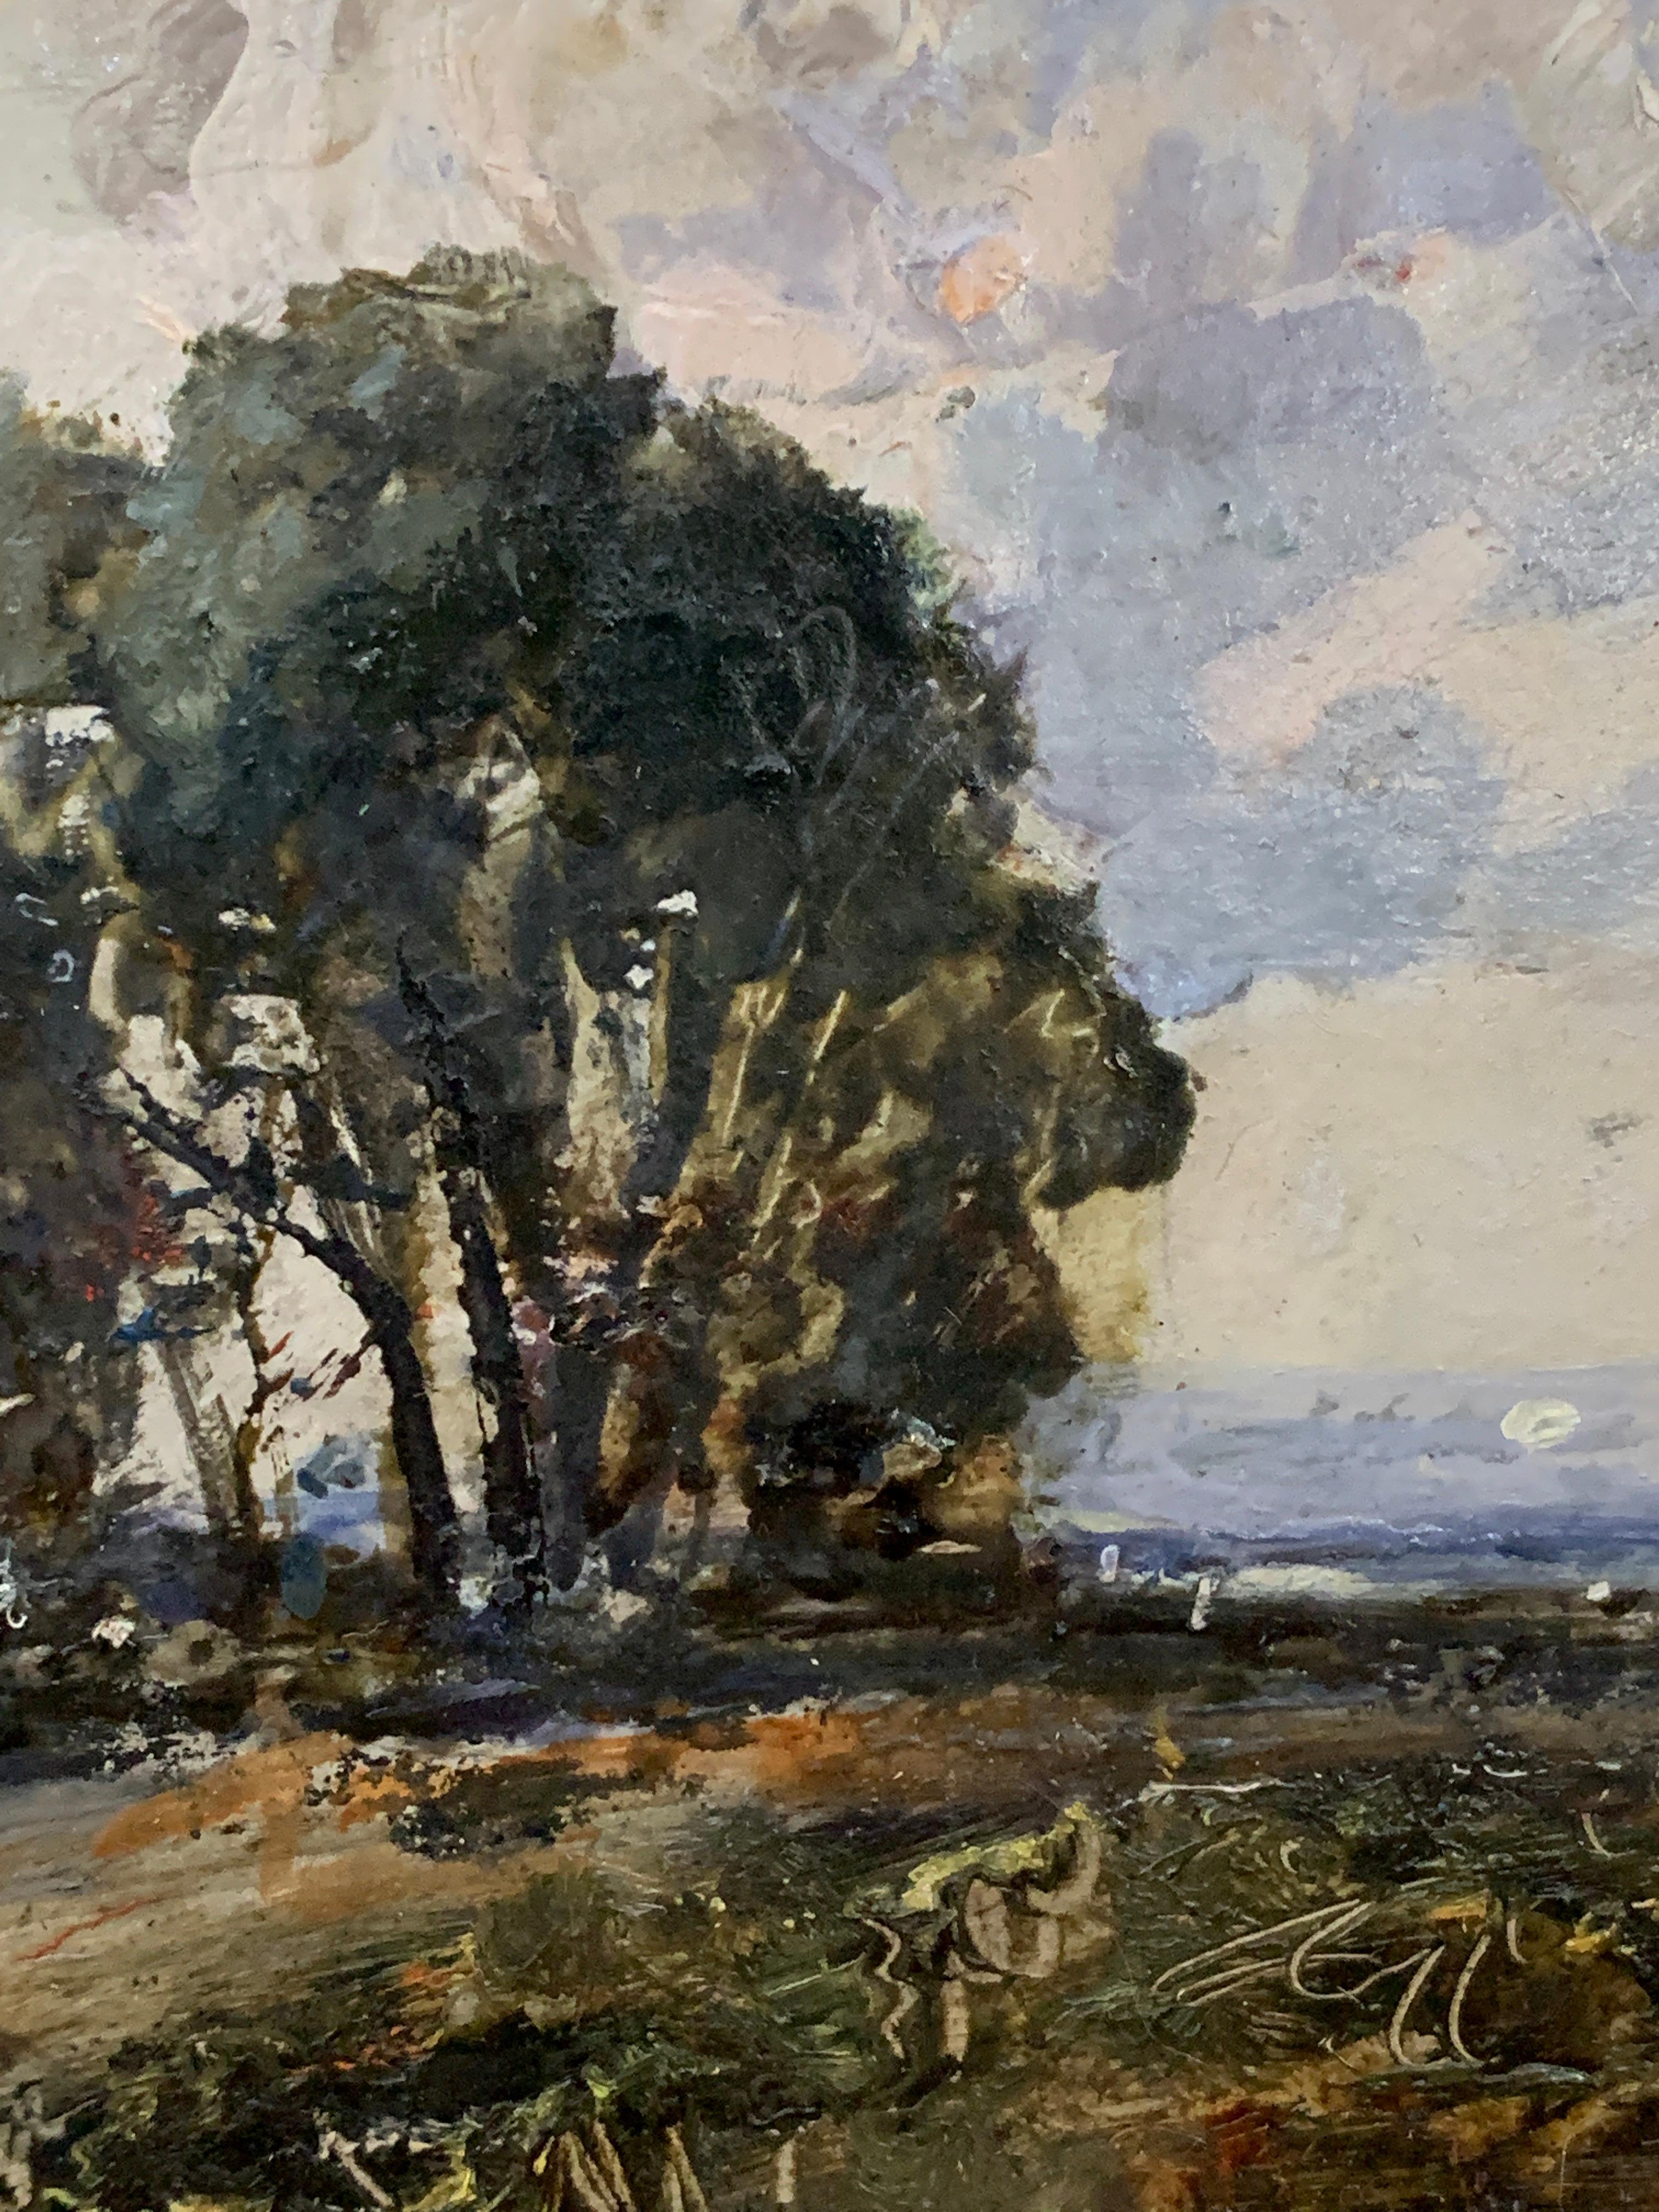 A Cloudy Day, English Impressionist River Landscape with figure and cottage, circa 1922.

Alexander Fuller Maitland painted coastal subjects and marines. Exhibited thirteen works, including Channel 